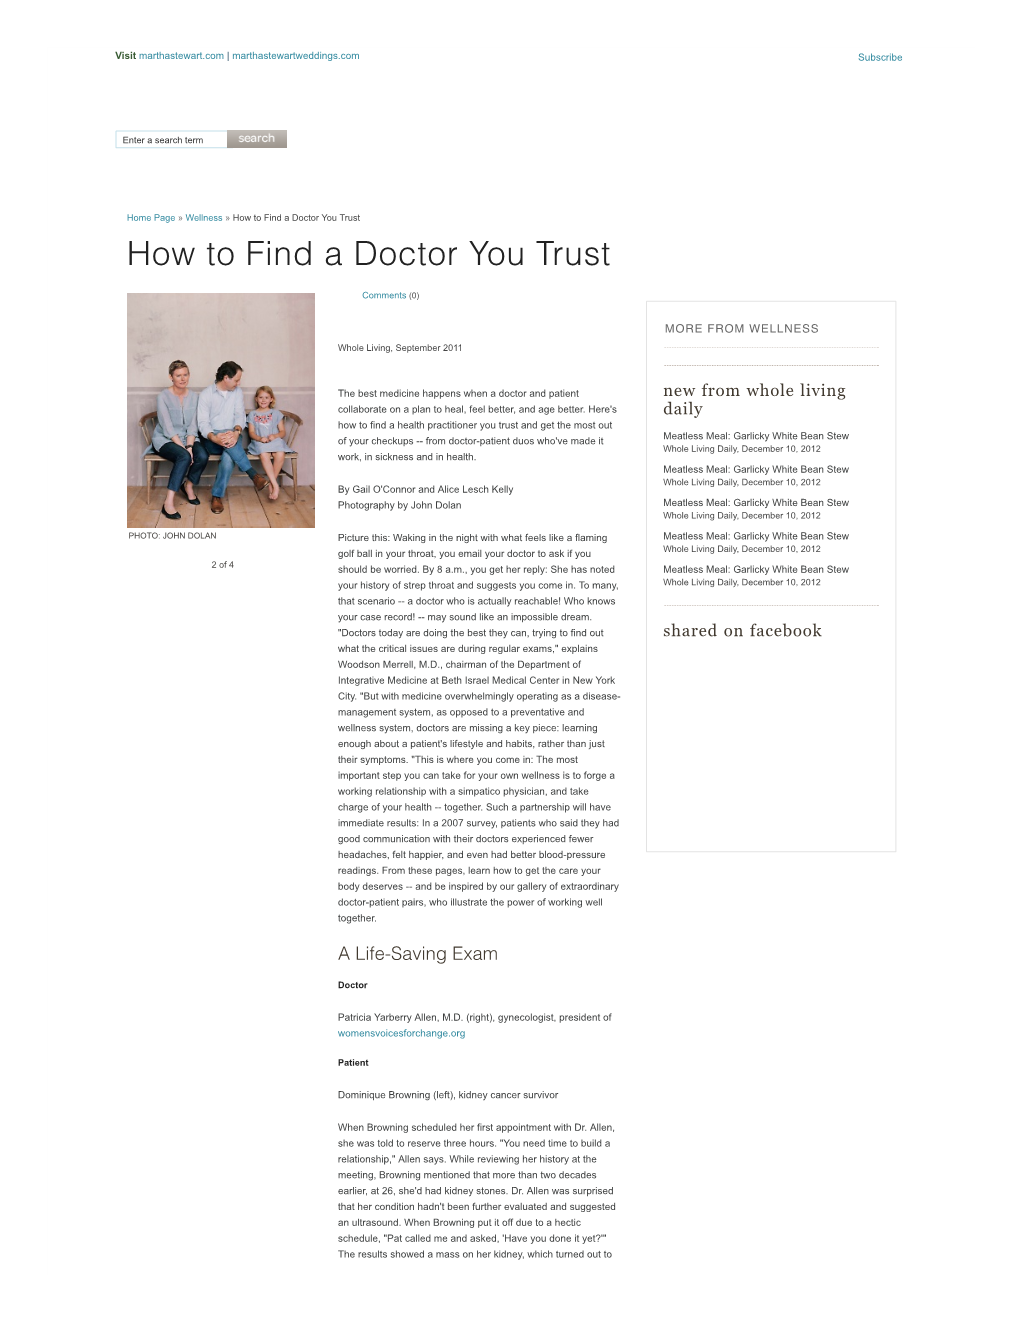 “Whole Living” on How to Find a Doctor You Trust